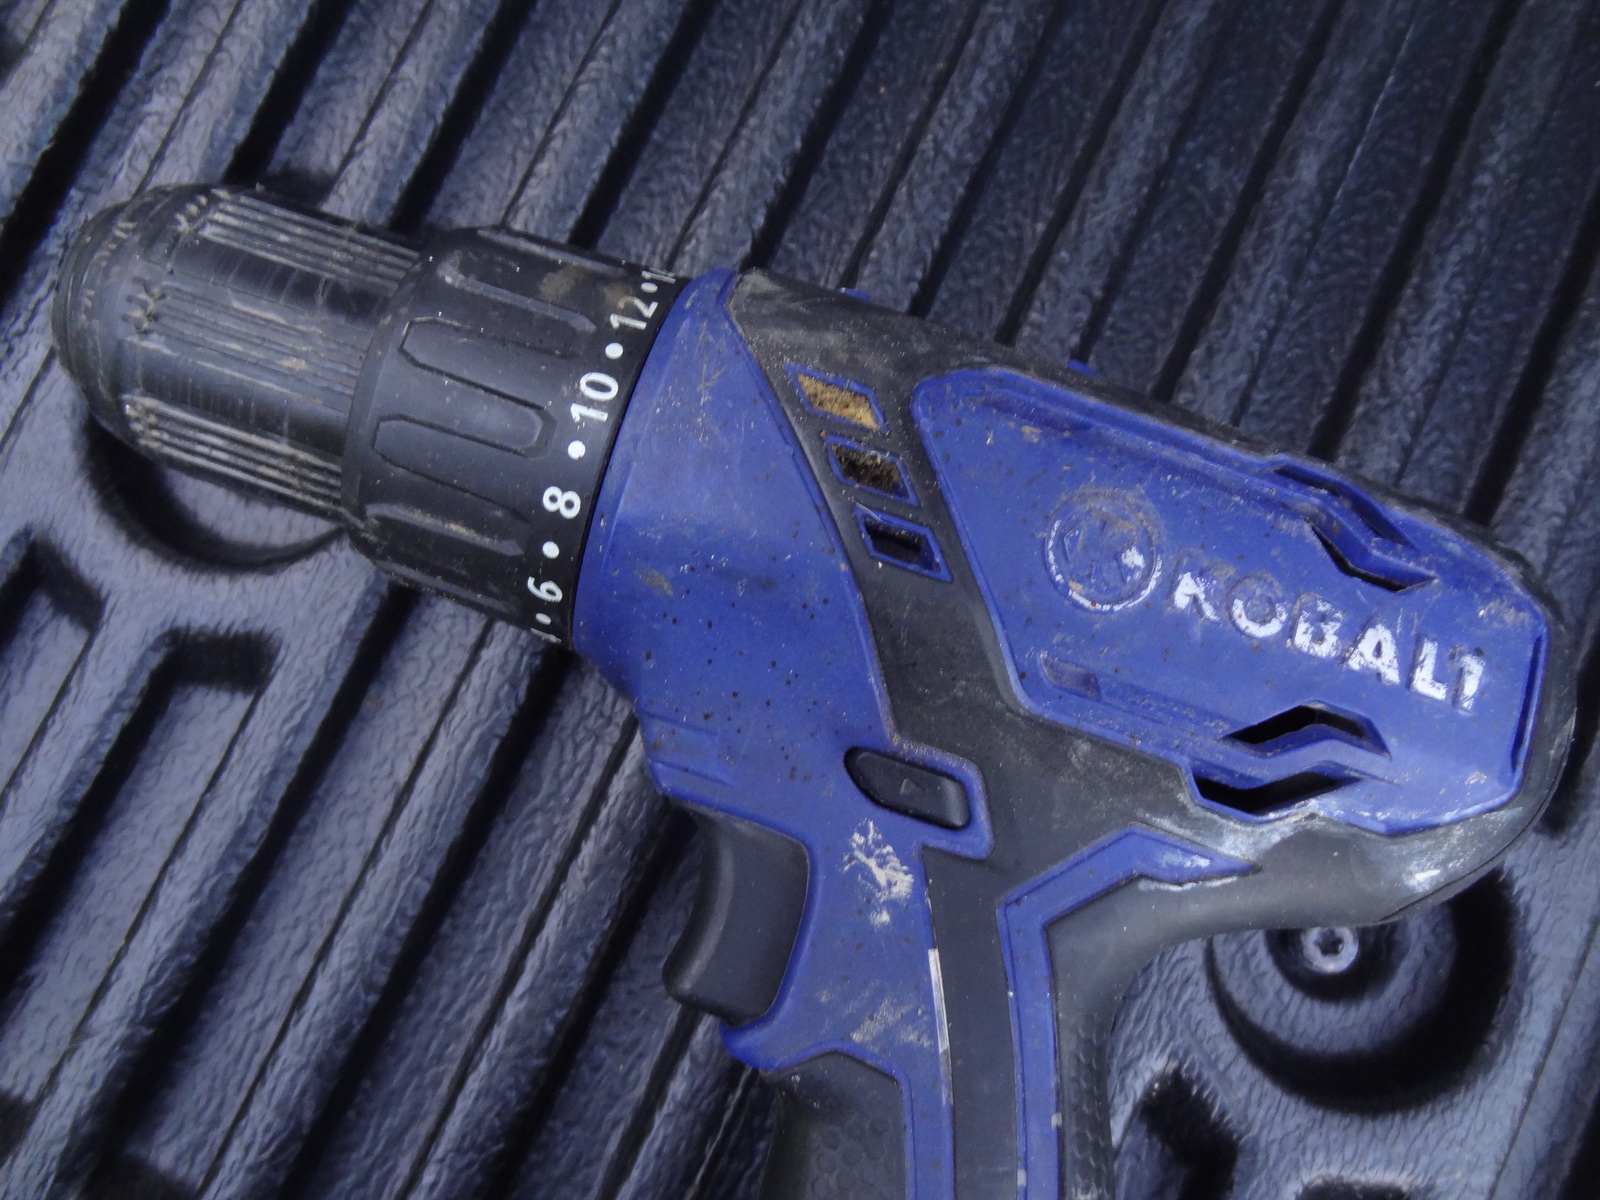 KOBALT 18V 18 VOLT  DRILL DRIVER  K18LD-26A  WORKS WELL USED   CLEAN  BARE TOOL - $39.99